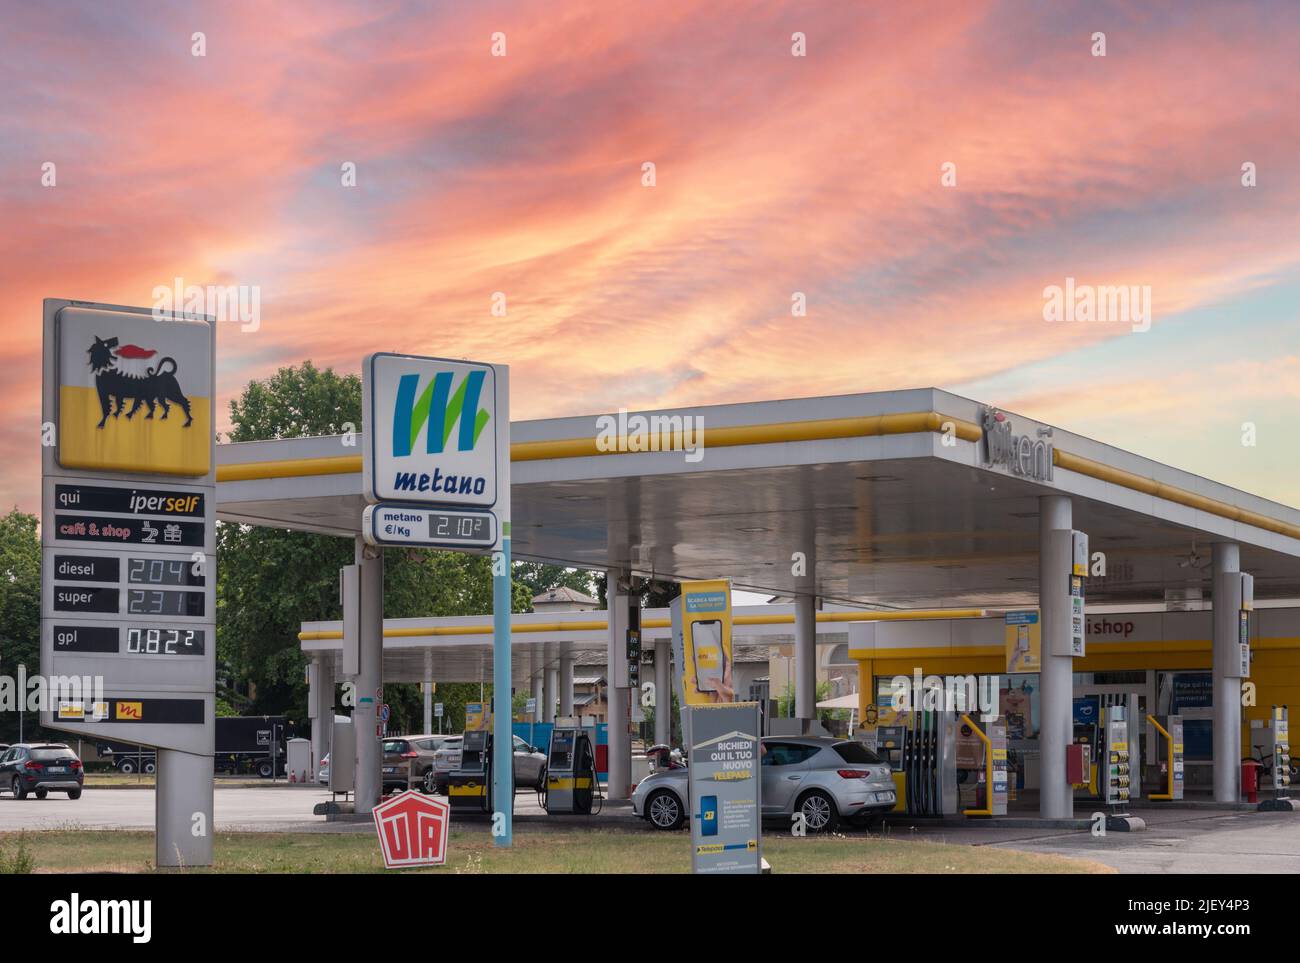 Cuneo, Italy, - June 27, 2022: Eni logo sign with fuel price display and Metano (methane) sign in gas station Eni, it is an Italian oil company worldw Stock Photo